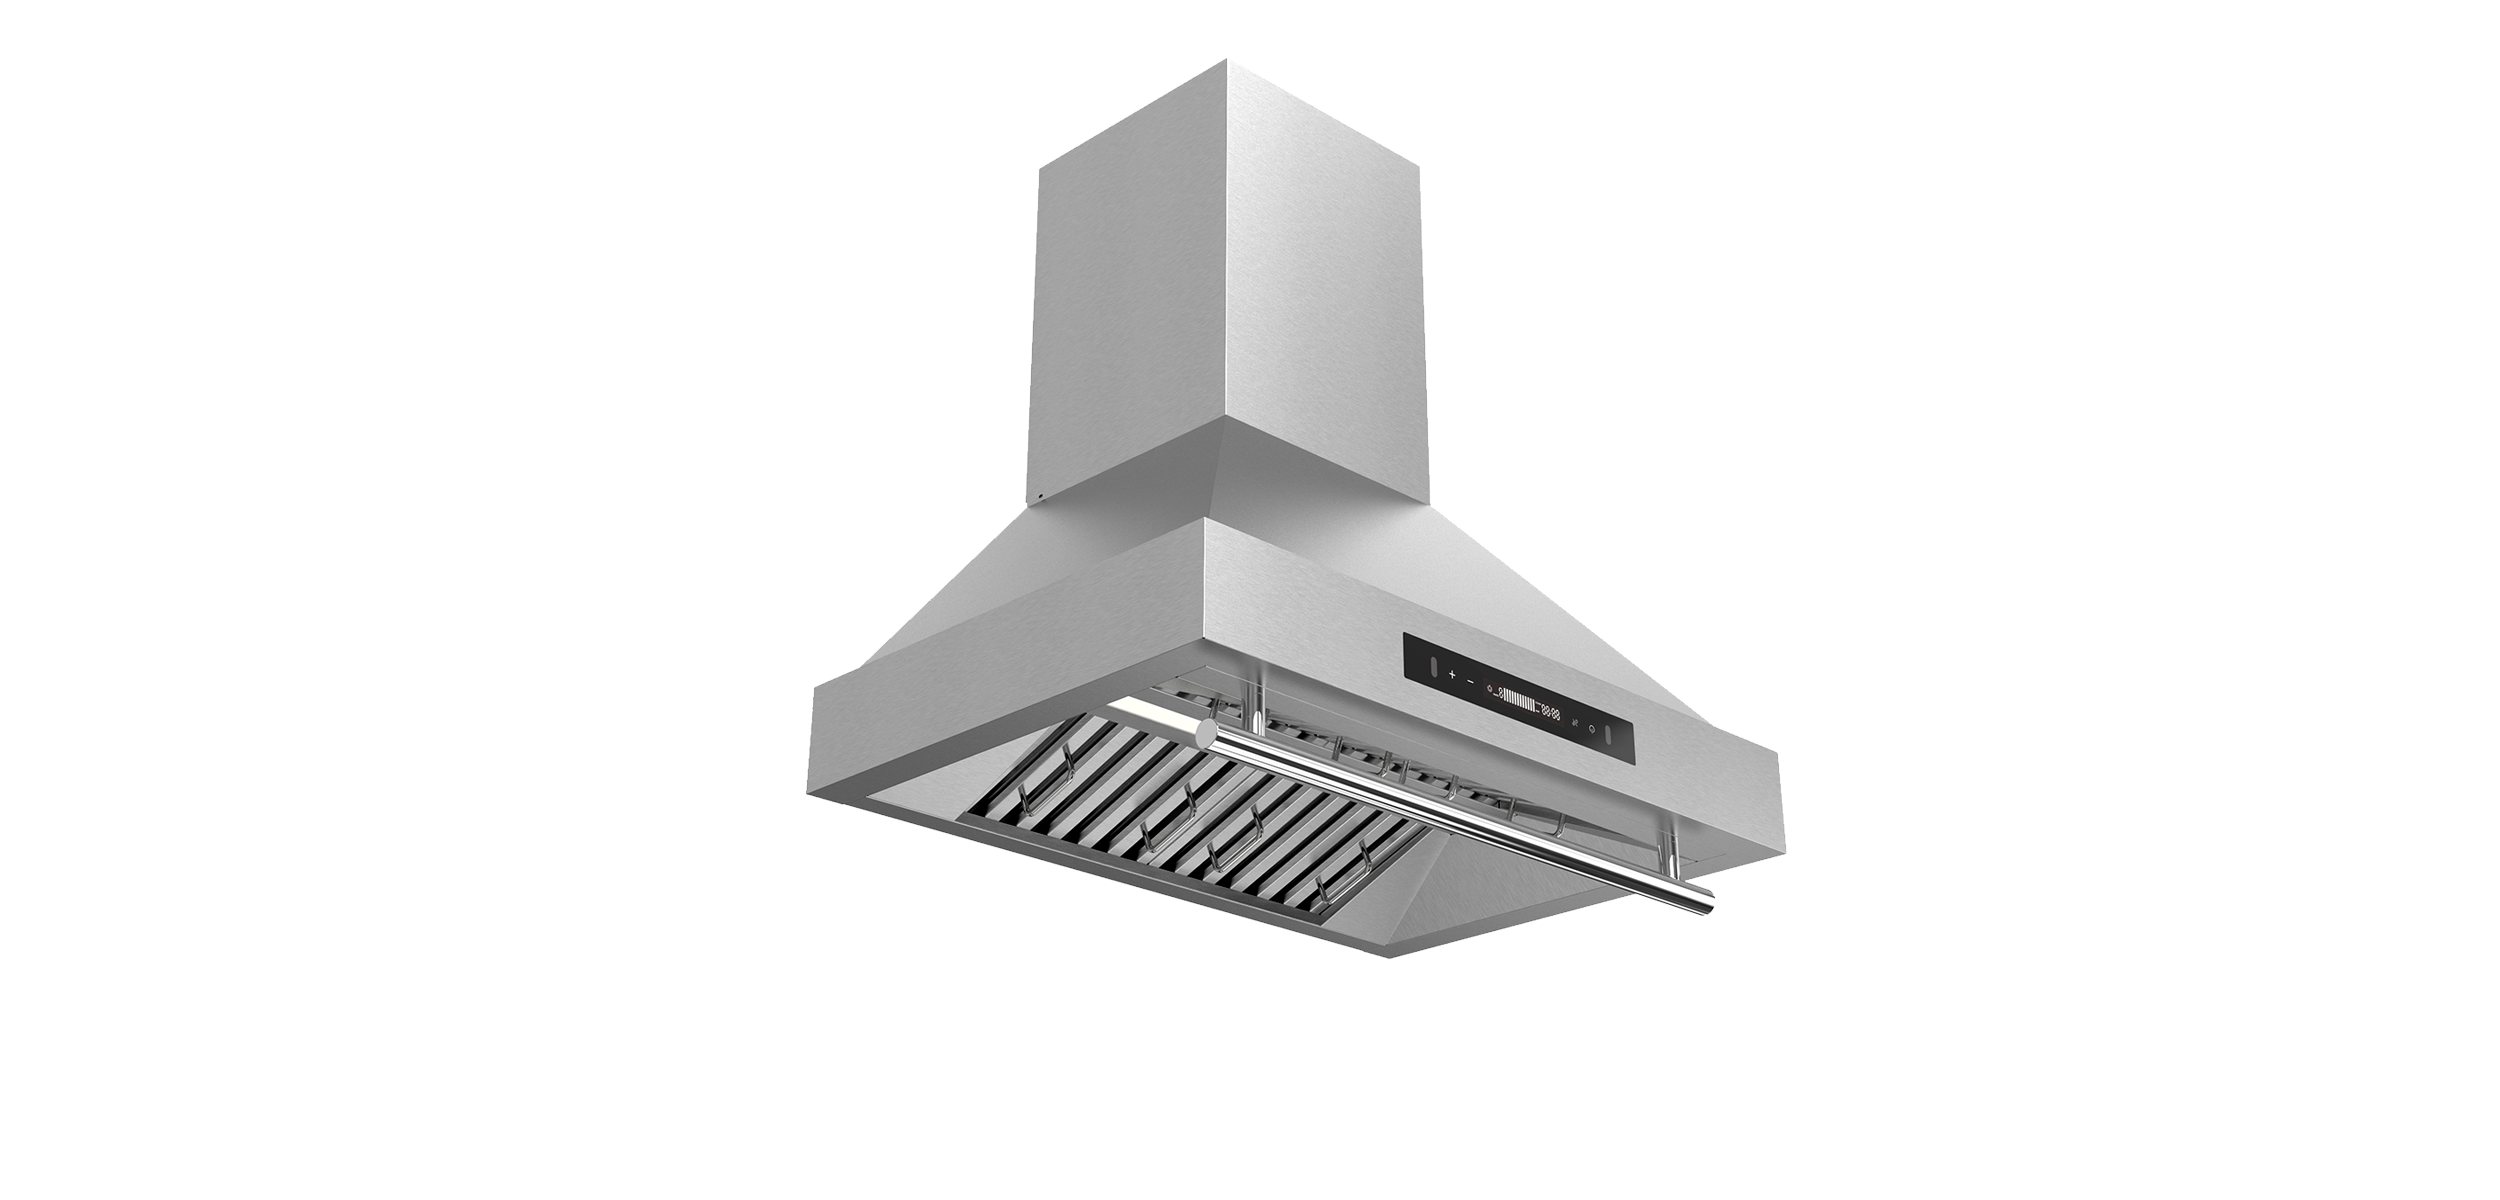 Tieasy 30 inch Wall Mount Hood 900 CFM Ducted/Ductless with Handwave Sensor and Touch Buttons- USGD 2975 Range Hood USGD 2975+ Filter(Ductless)